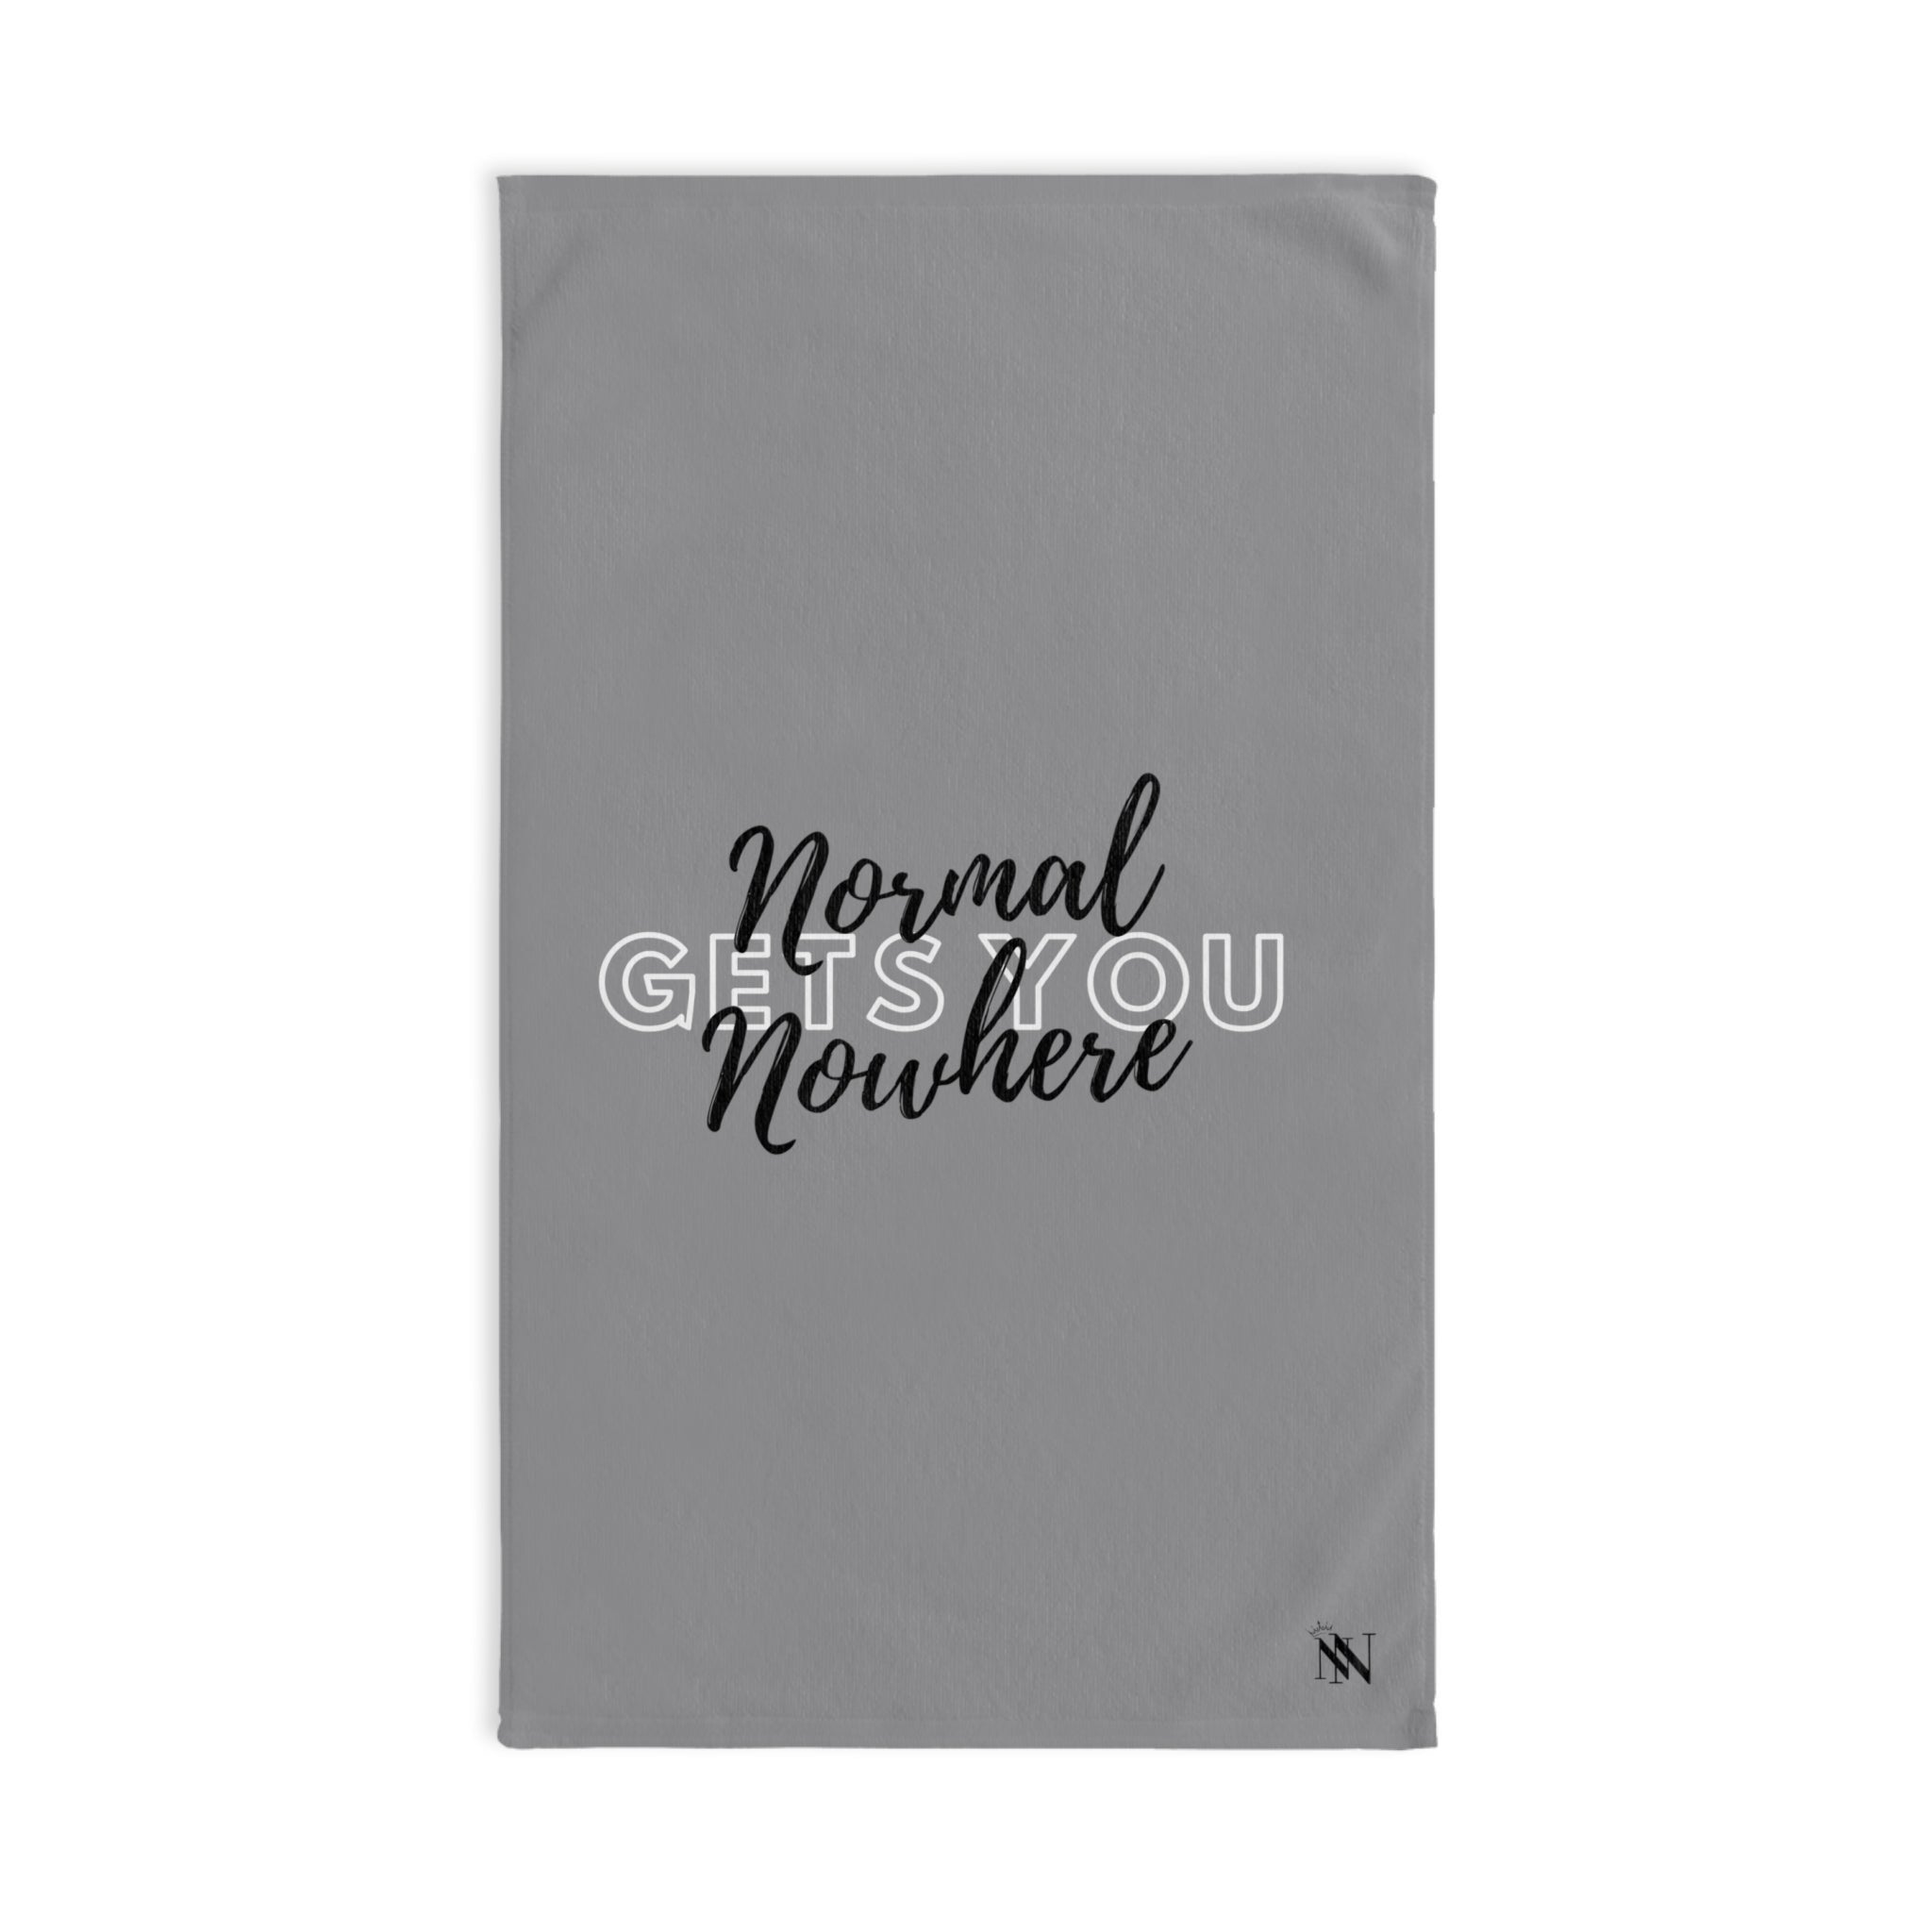 Normal Nowhere Grey | Anniversary Wedding, Christmas, Valentines Day, Birthday Gifts for Him, Her, Romantic Gifts for Wife, Girlfriend, Couples Gifts for Boyfriend, Husband NECTAR NAPKINS